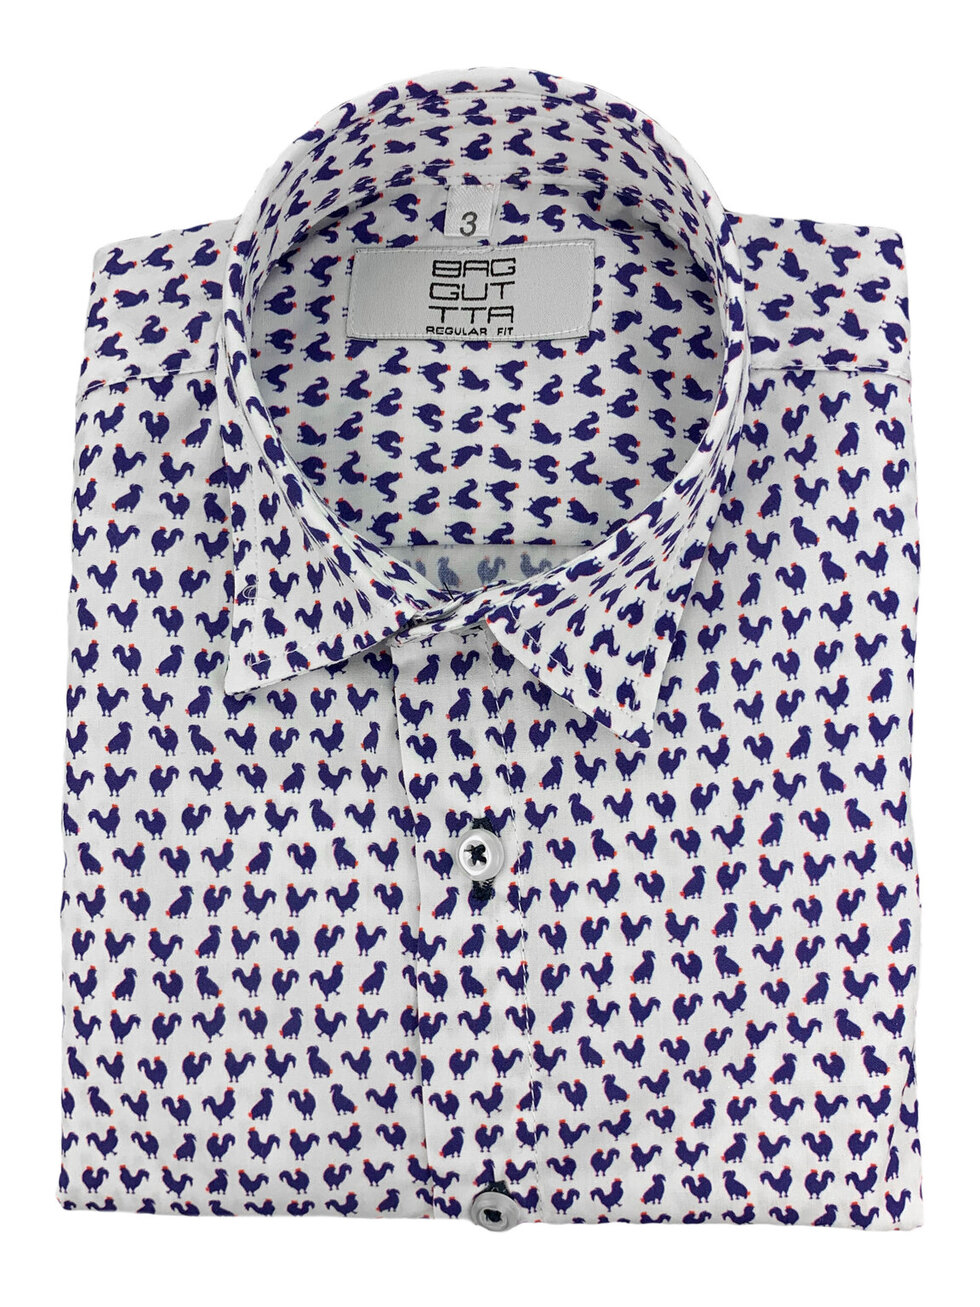 WHITE KIDS SHIRT WITH BLUE ROOSTER PATTERN